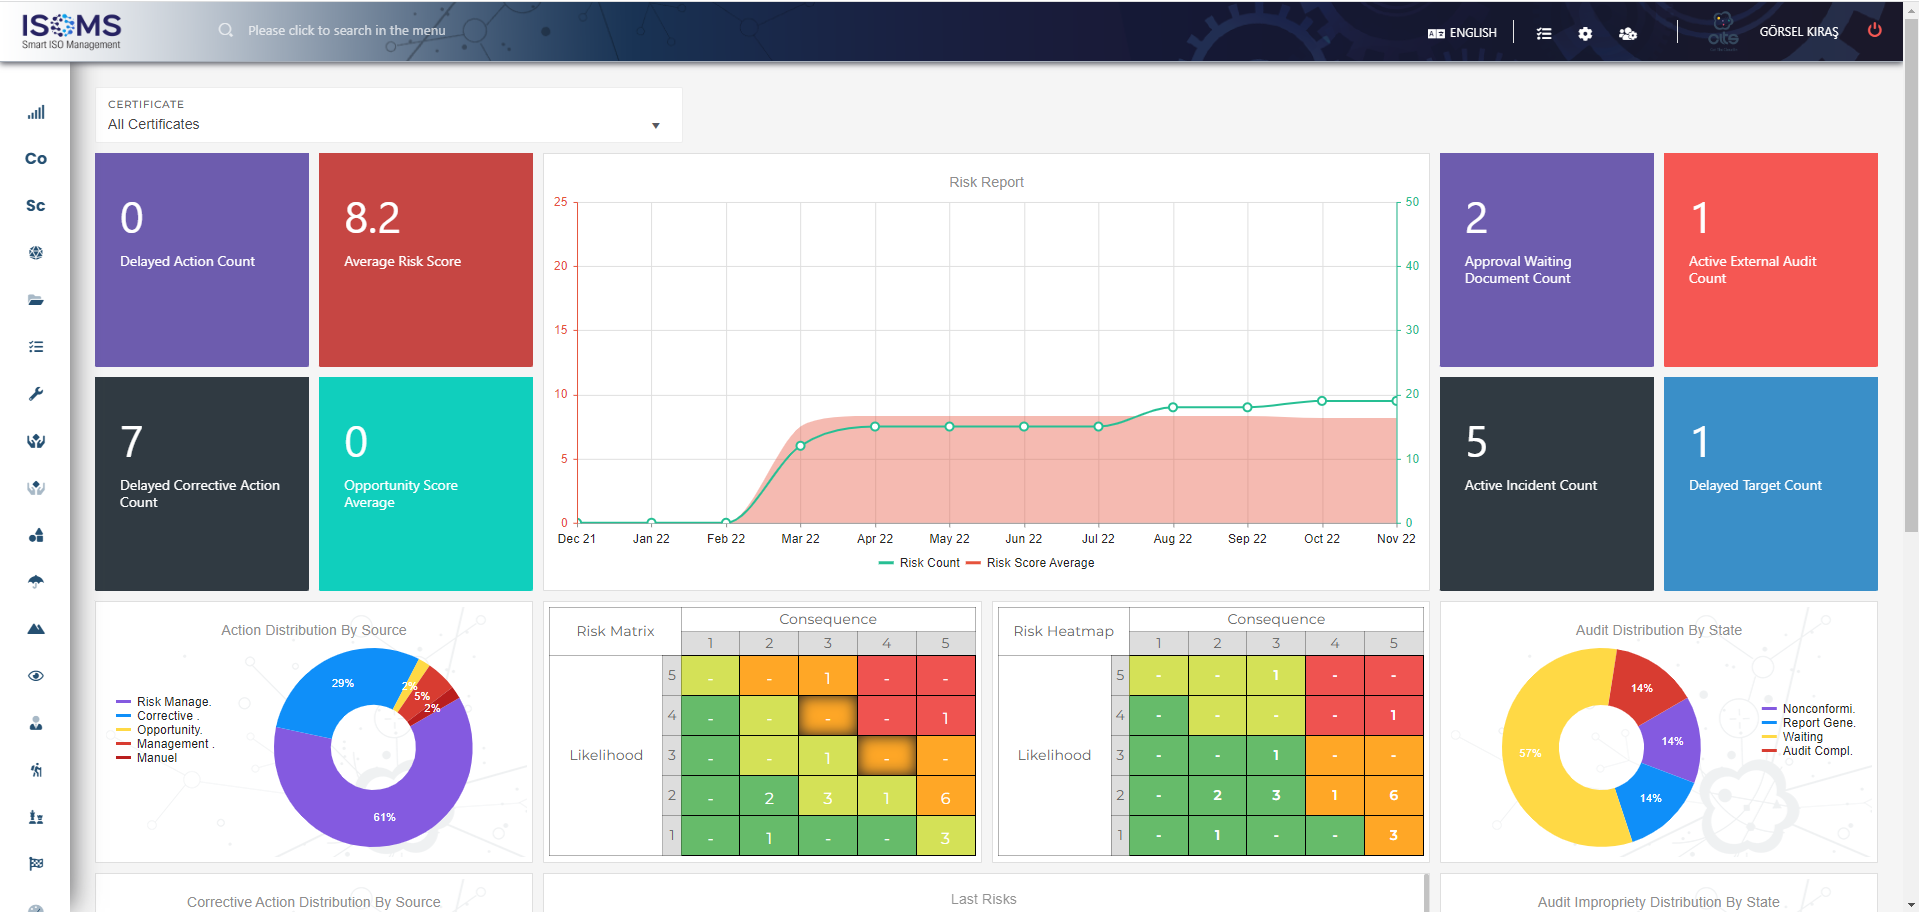 With ISOMS, you are able to monitor your management systems performance in a single dashboard. You can monitor current statuses of tasks, corrective actions, risks, audits, documents and so on..